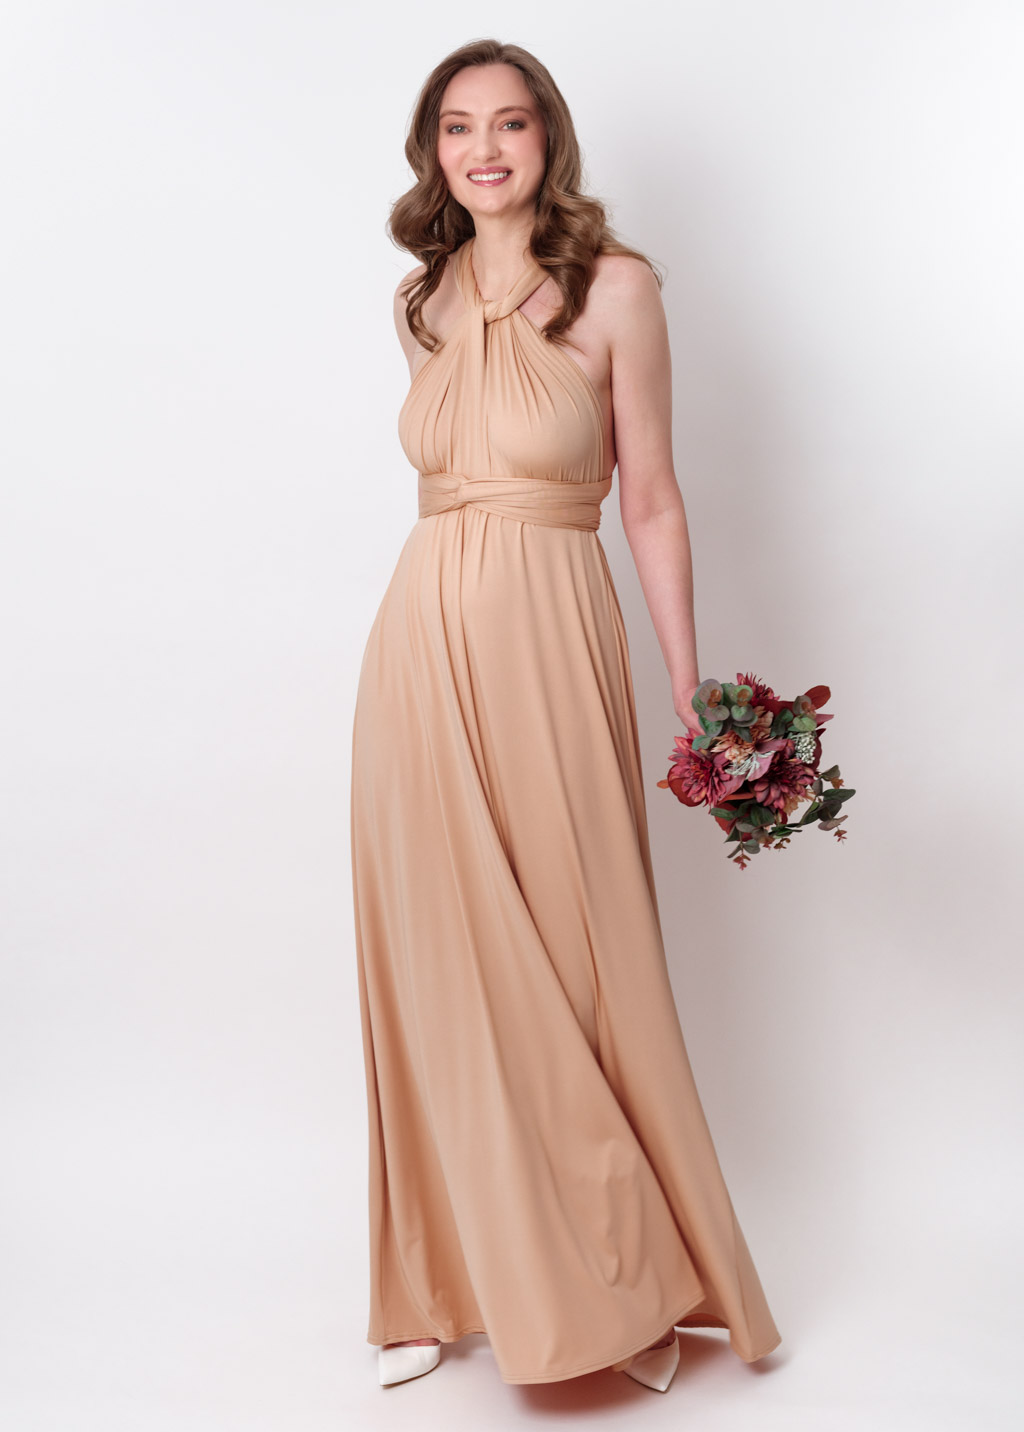 Champagne gold infinity long dress